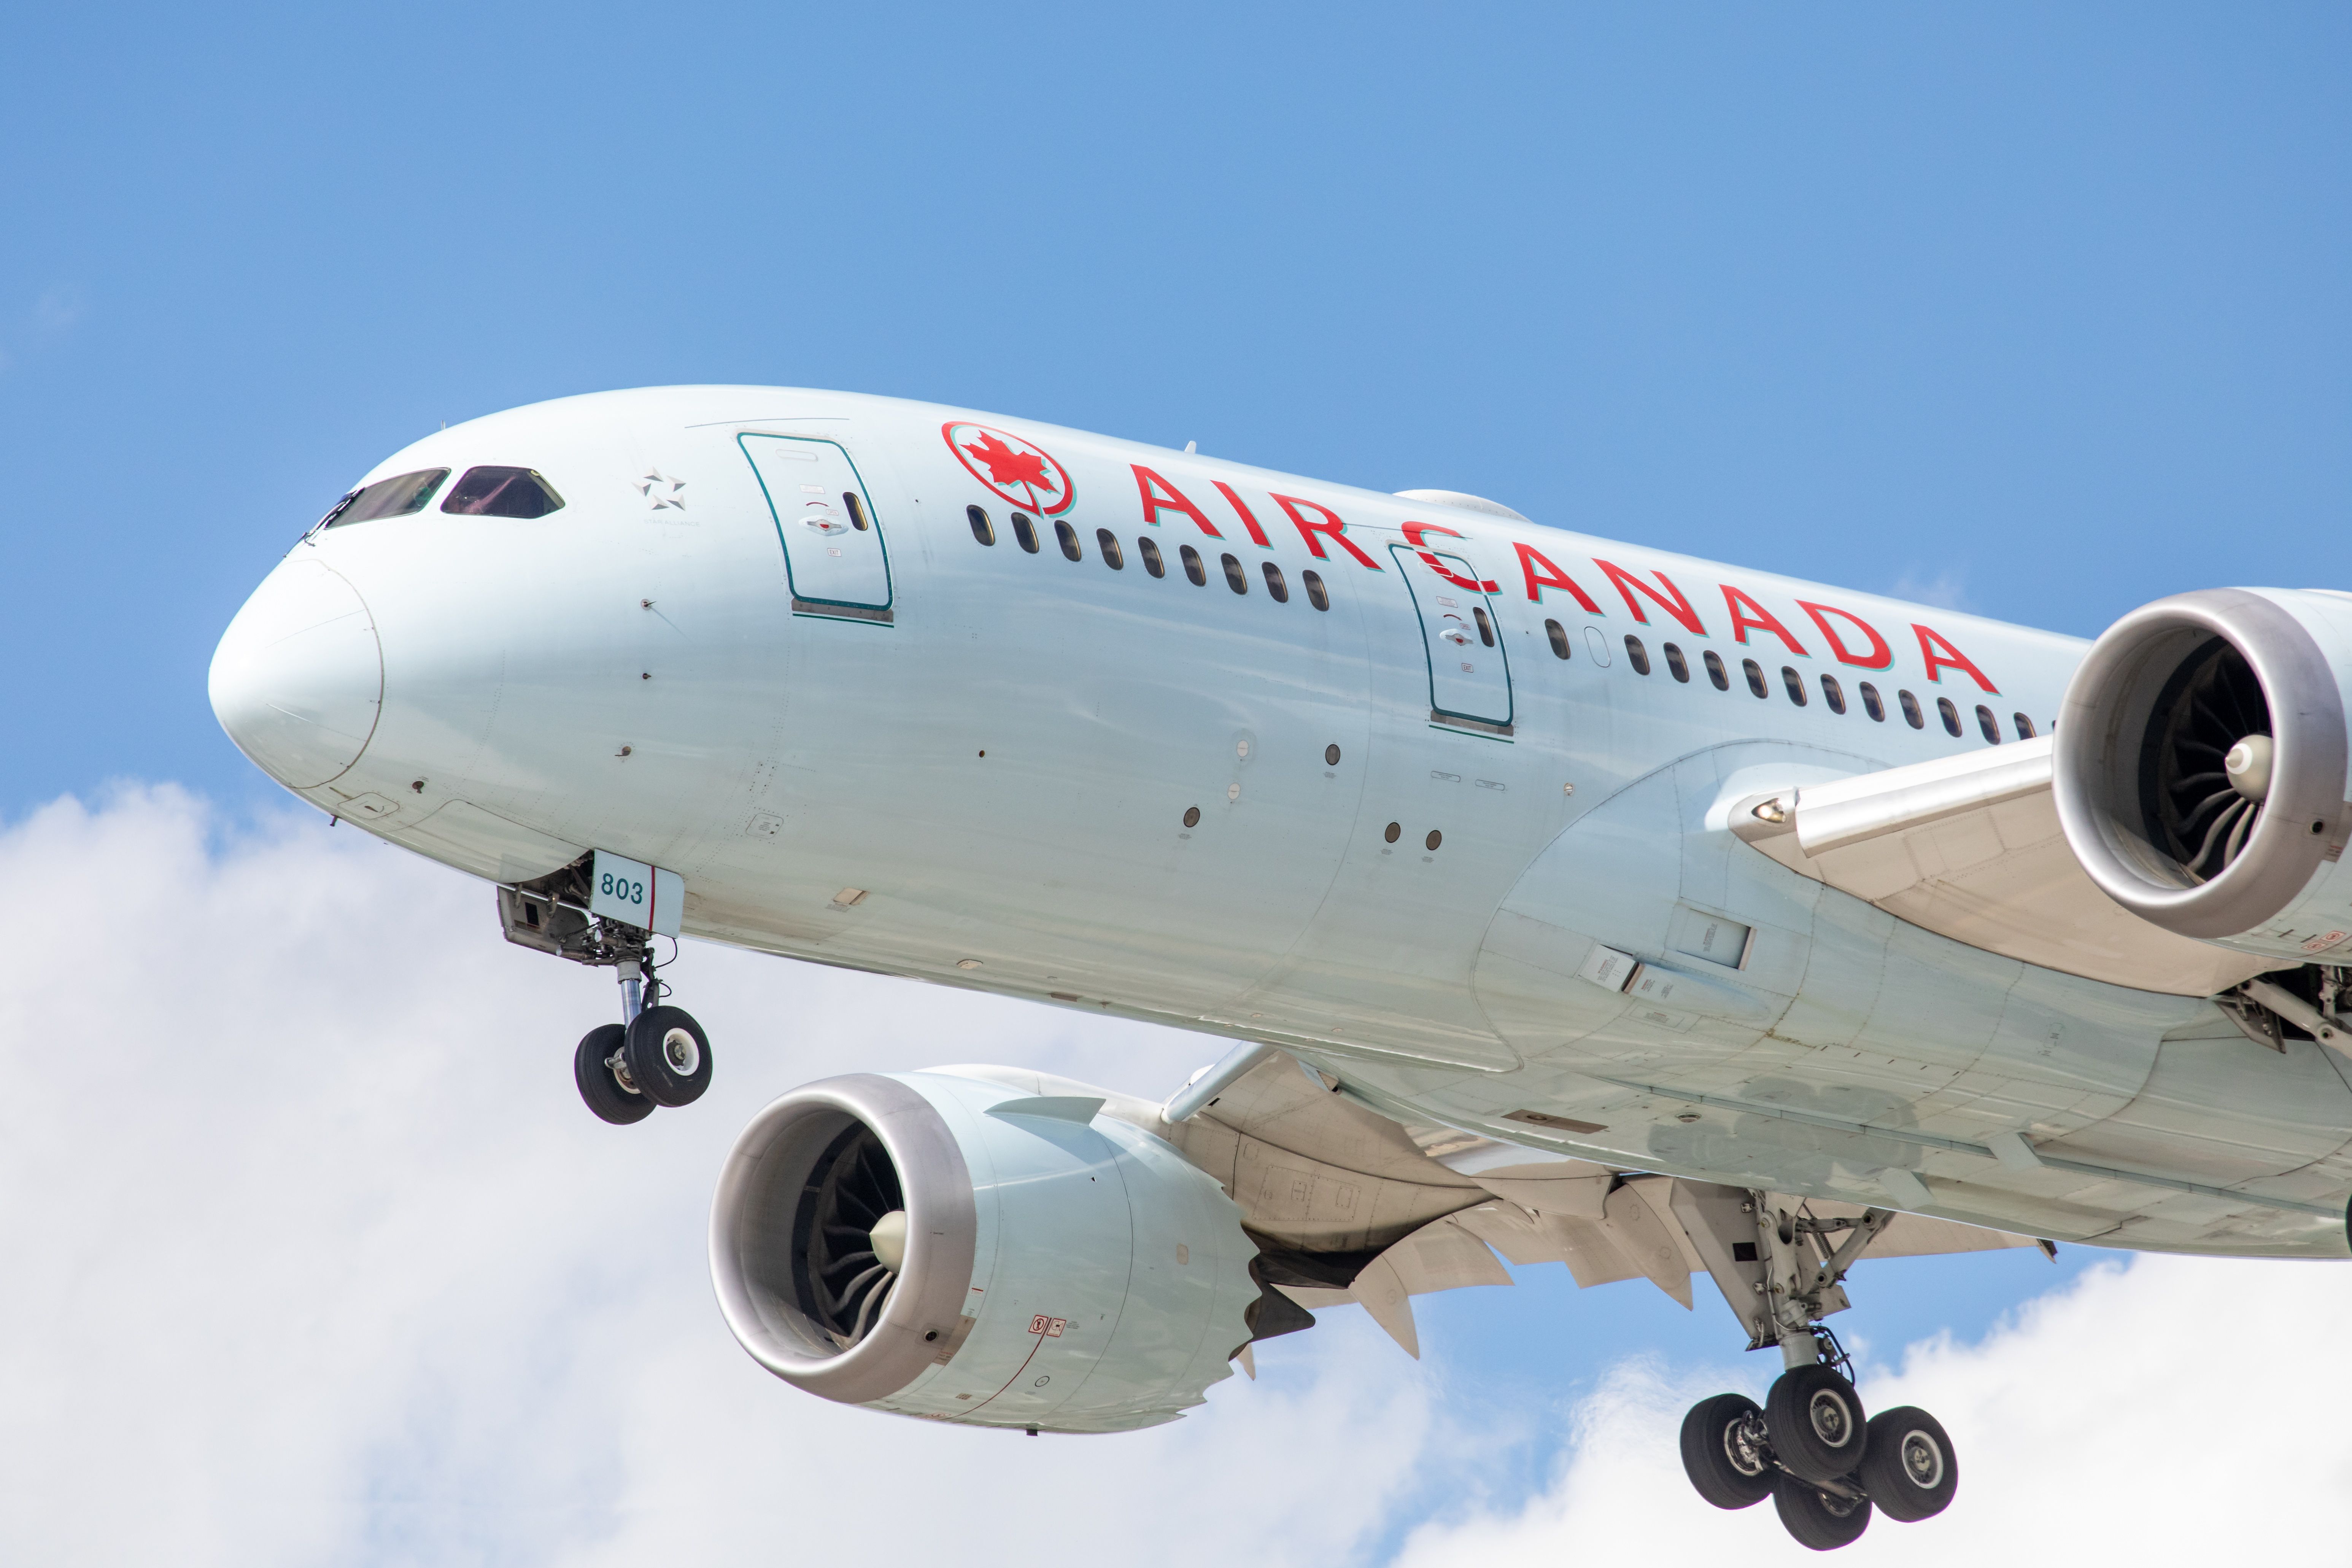  Air Canada Boeing 787 Dreamliner approaching Toronto's Pearson Airport